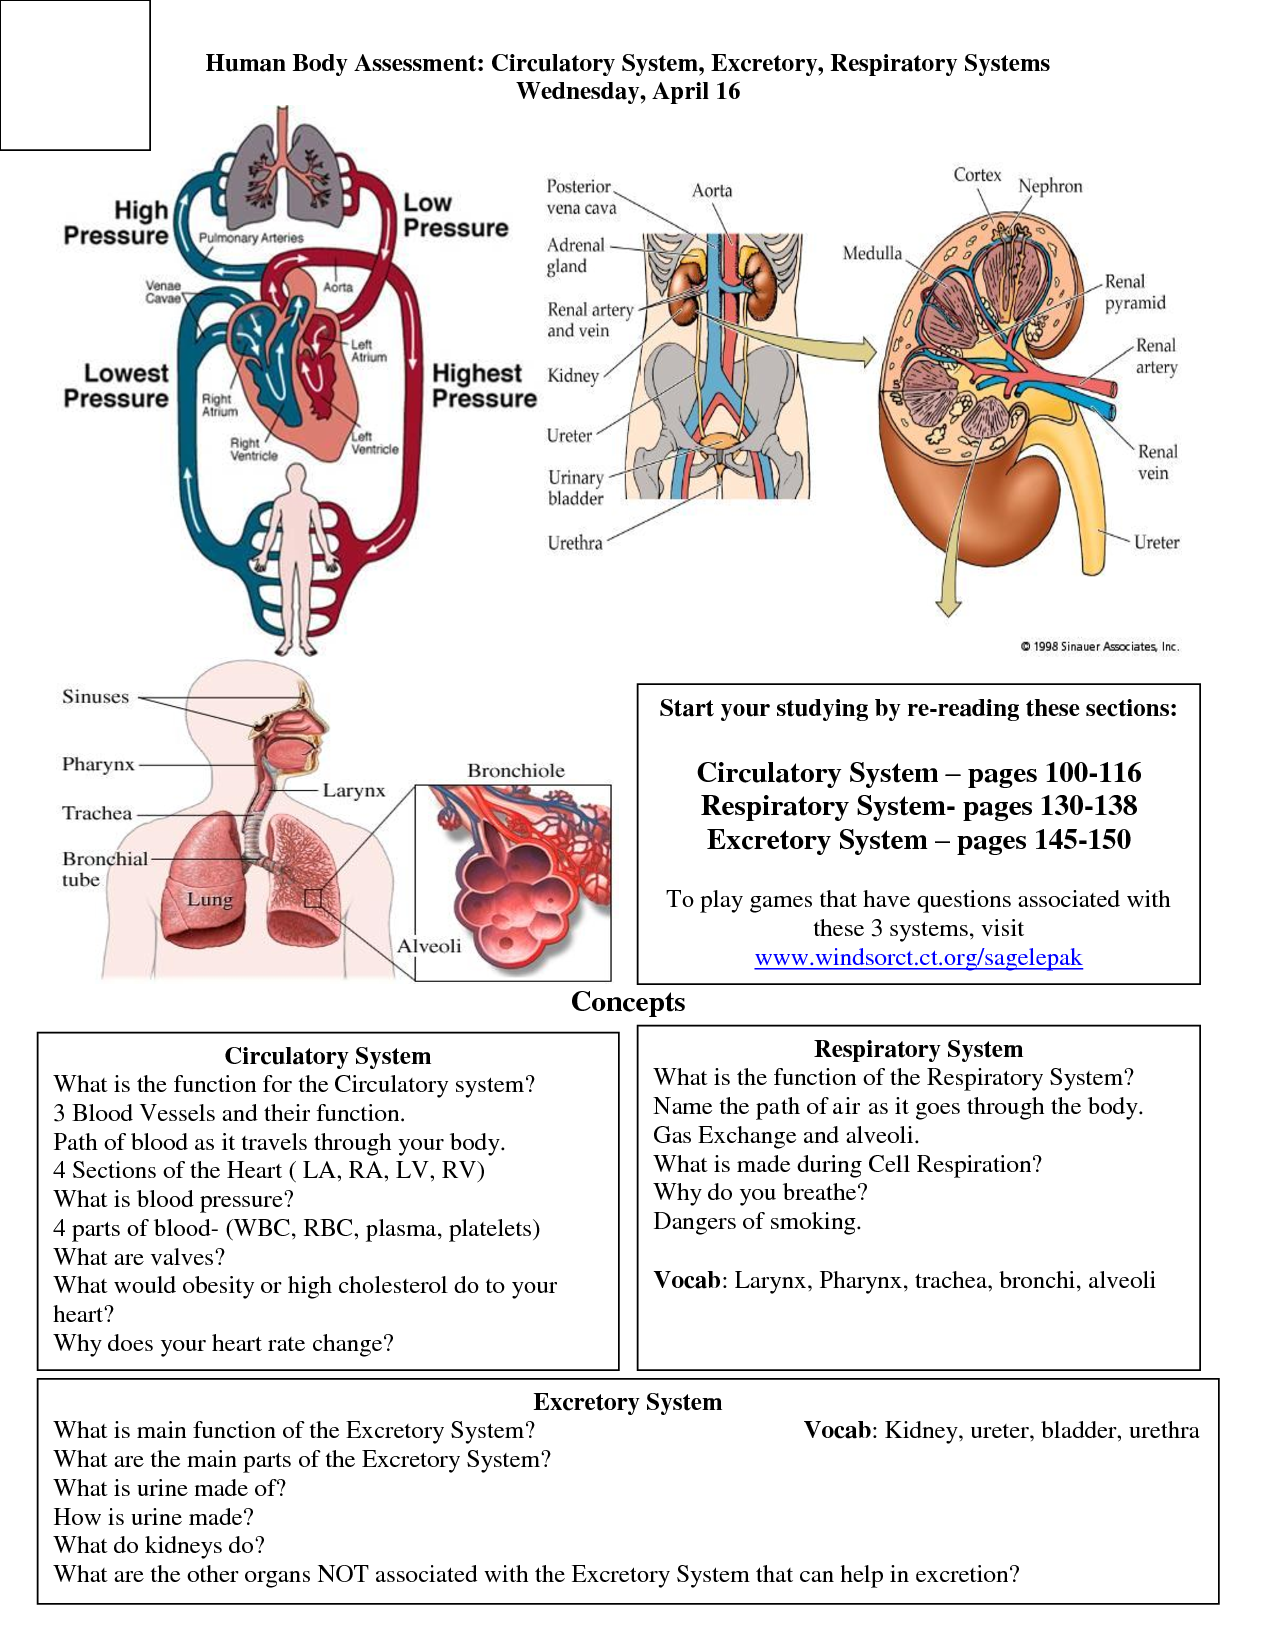 Human organ system and their functions